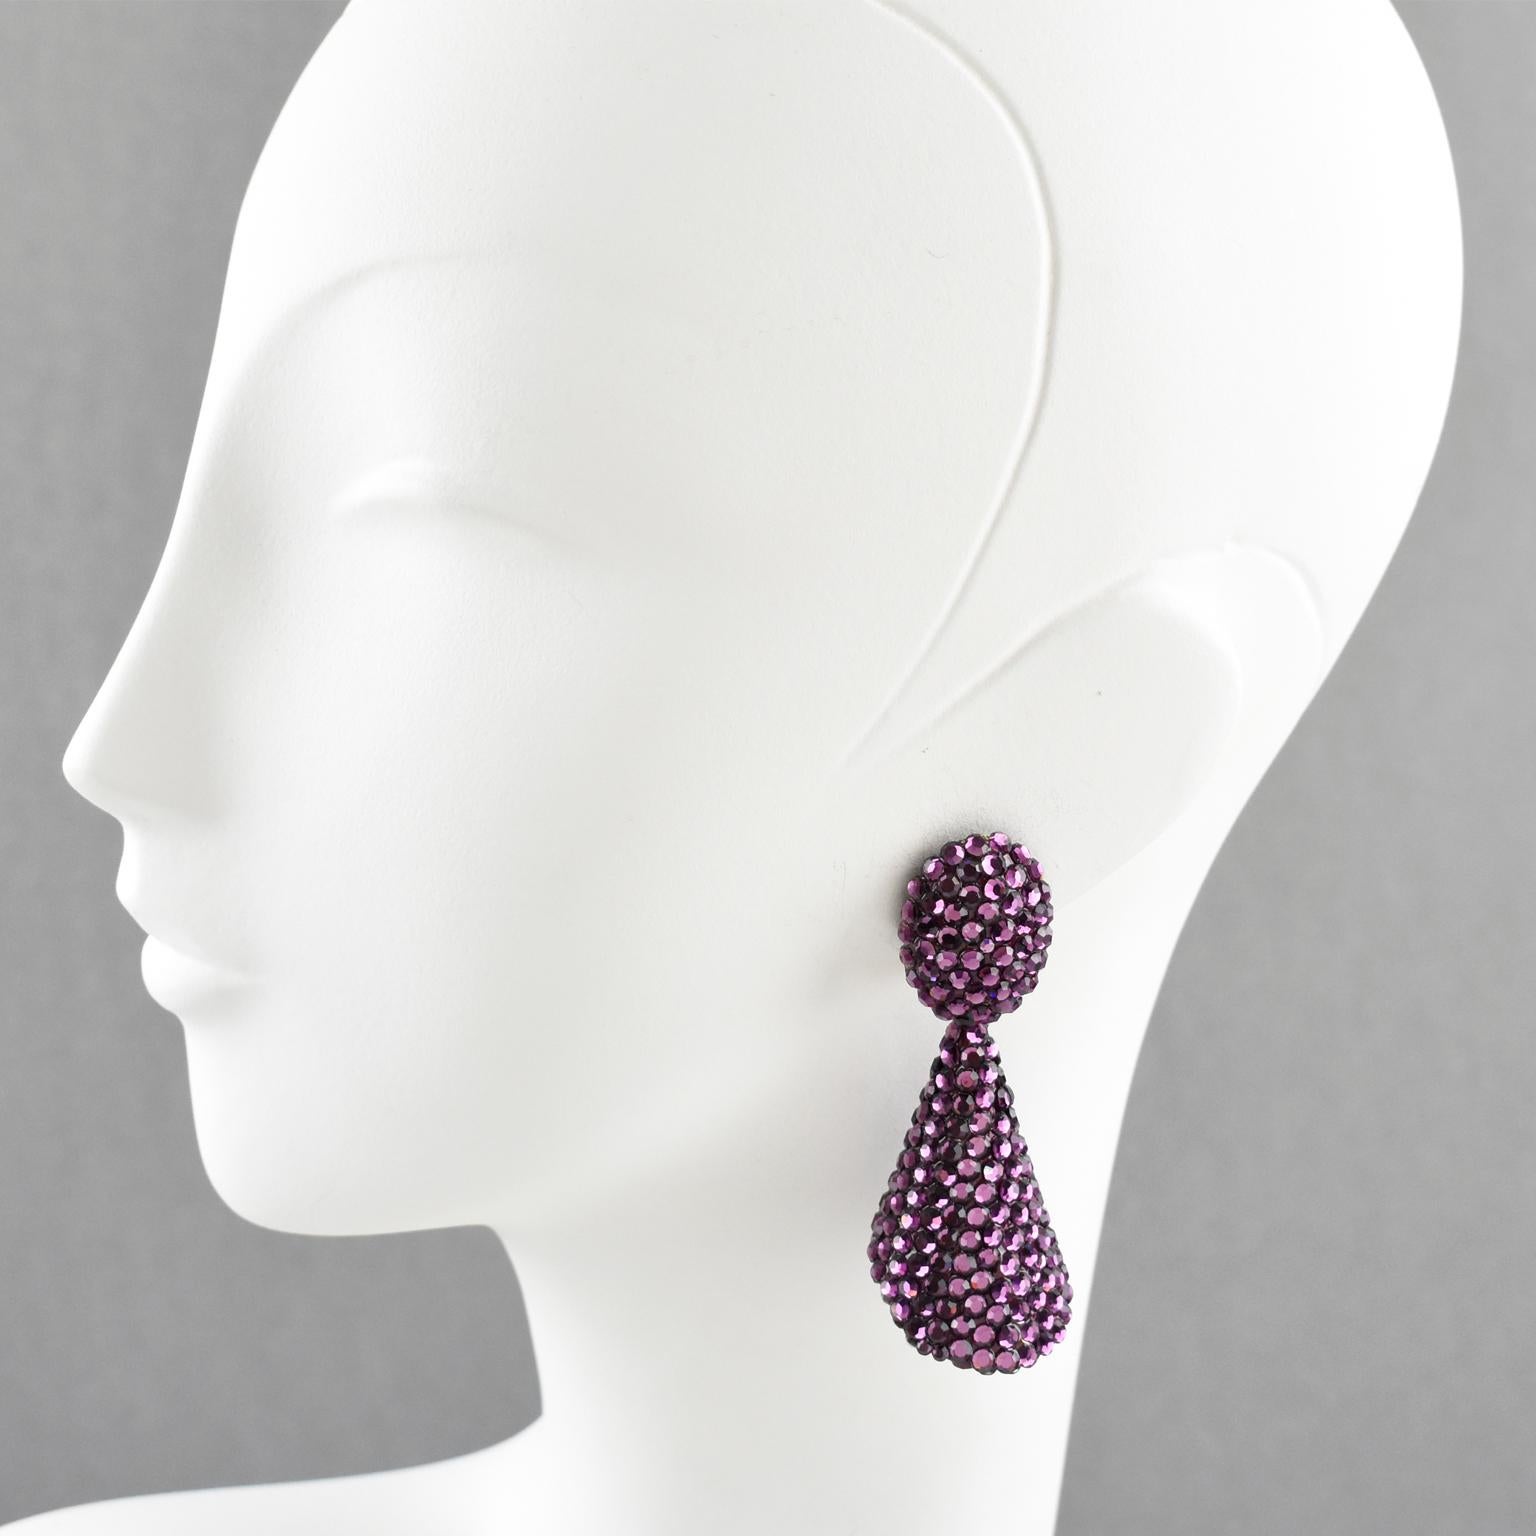 Gorgeous statement clip-on earrings designed by Richard Kerr in the 1980s. They are made up of his signature pave rhinestones. Featuring dangling cone shape all covered with colorful crystal rhinestones on purple resin background frame. Vivid